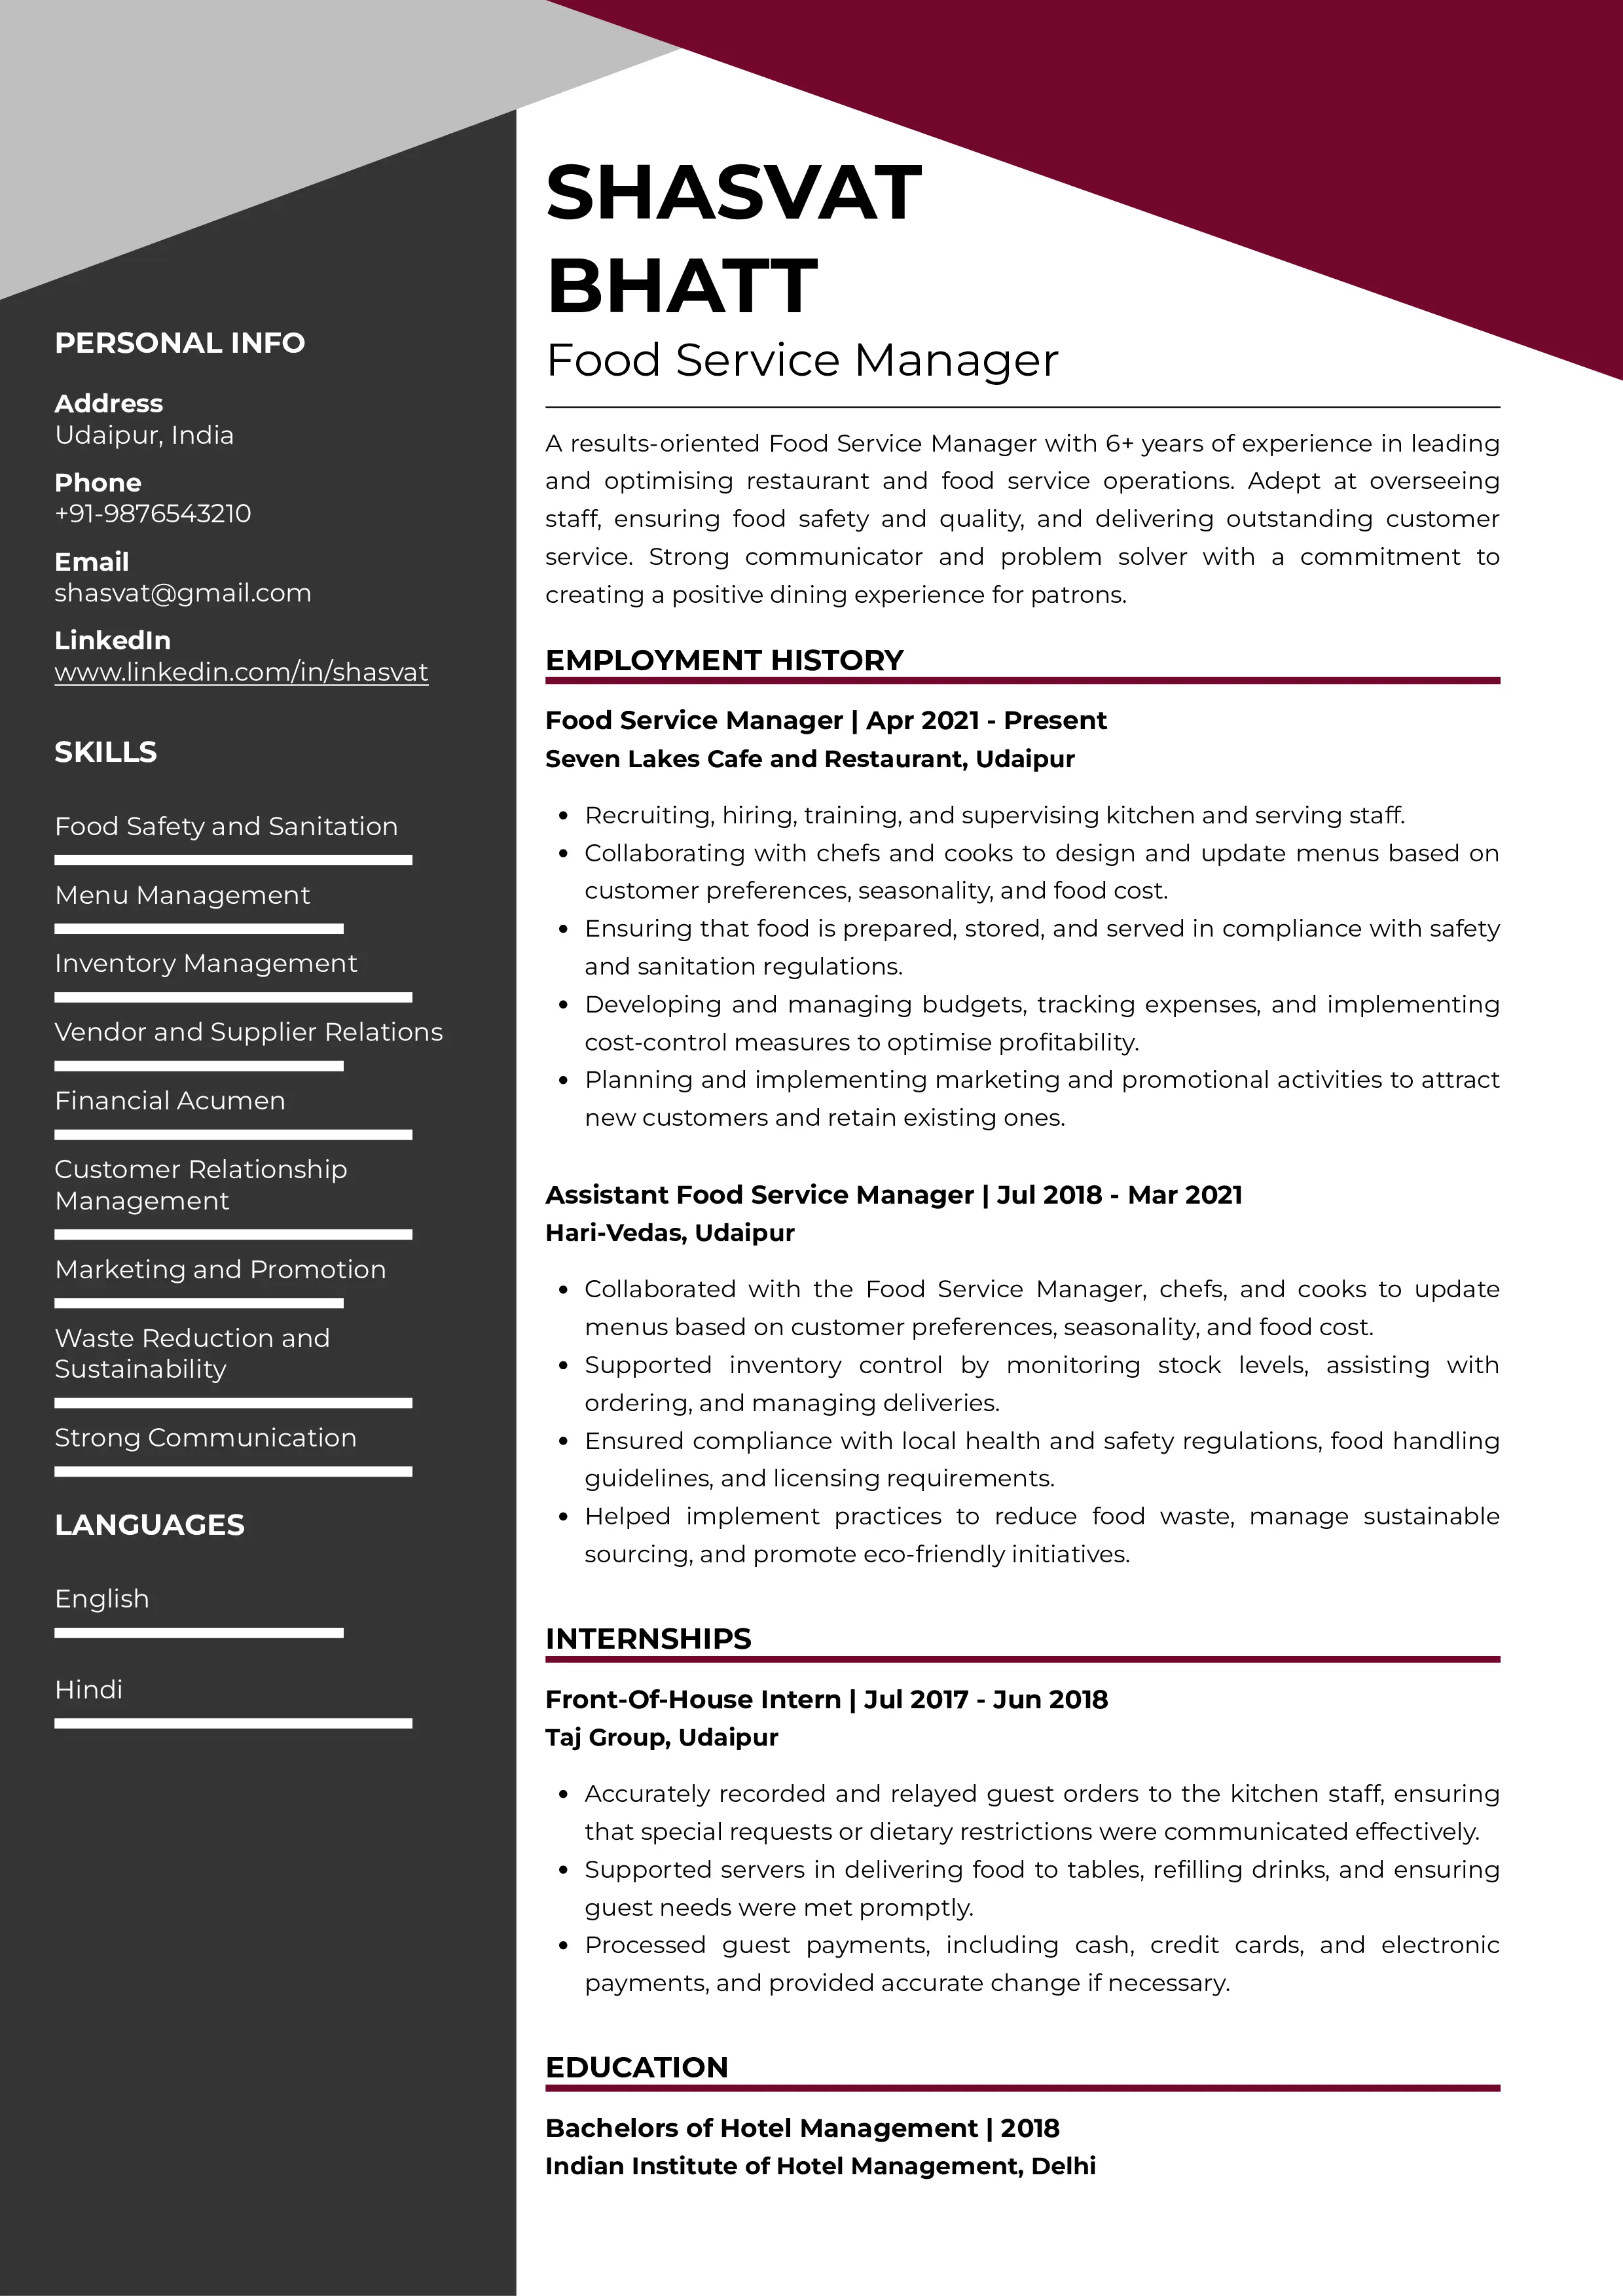 Sample Resume of Food Service Manager | Free Resume Templates & Samples on Resumod.co